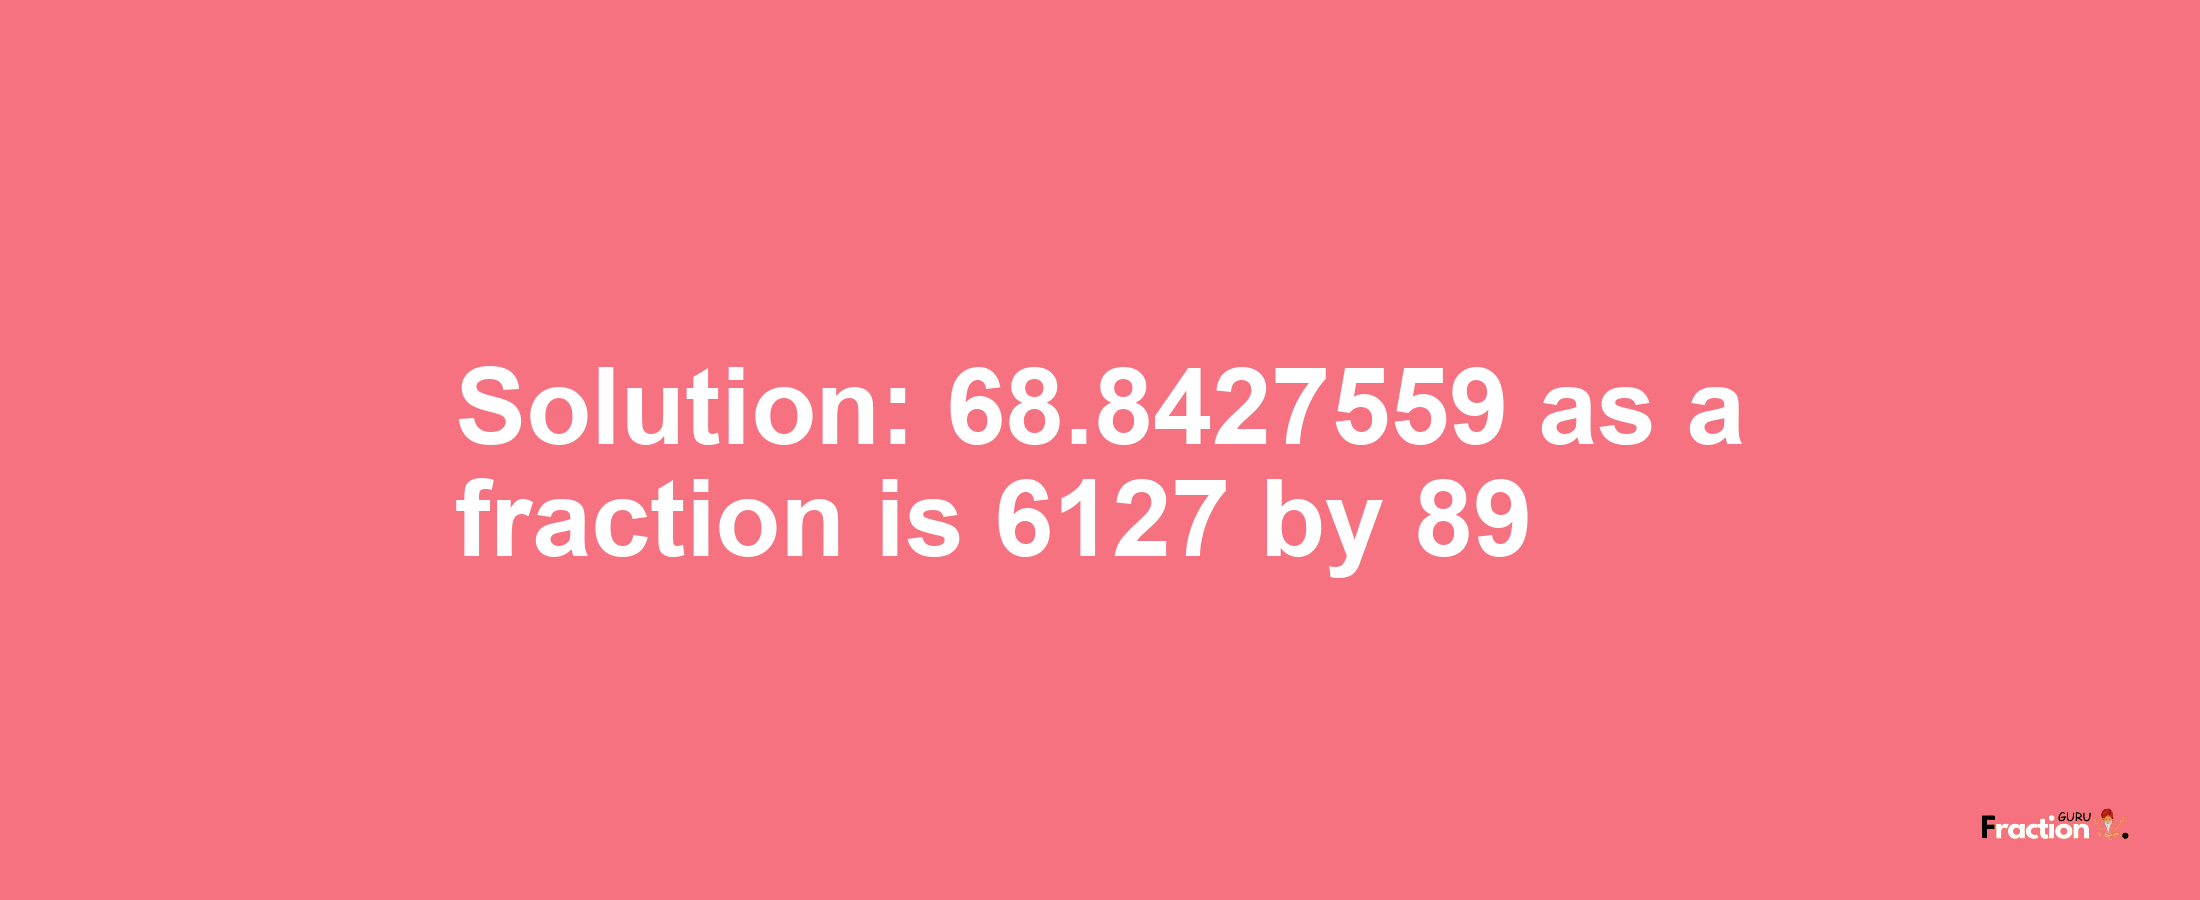 Solution:68.8427559 as a fraction is 6127/89